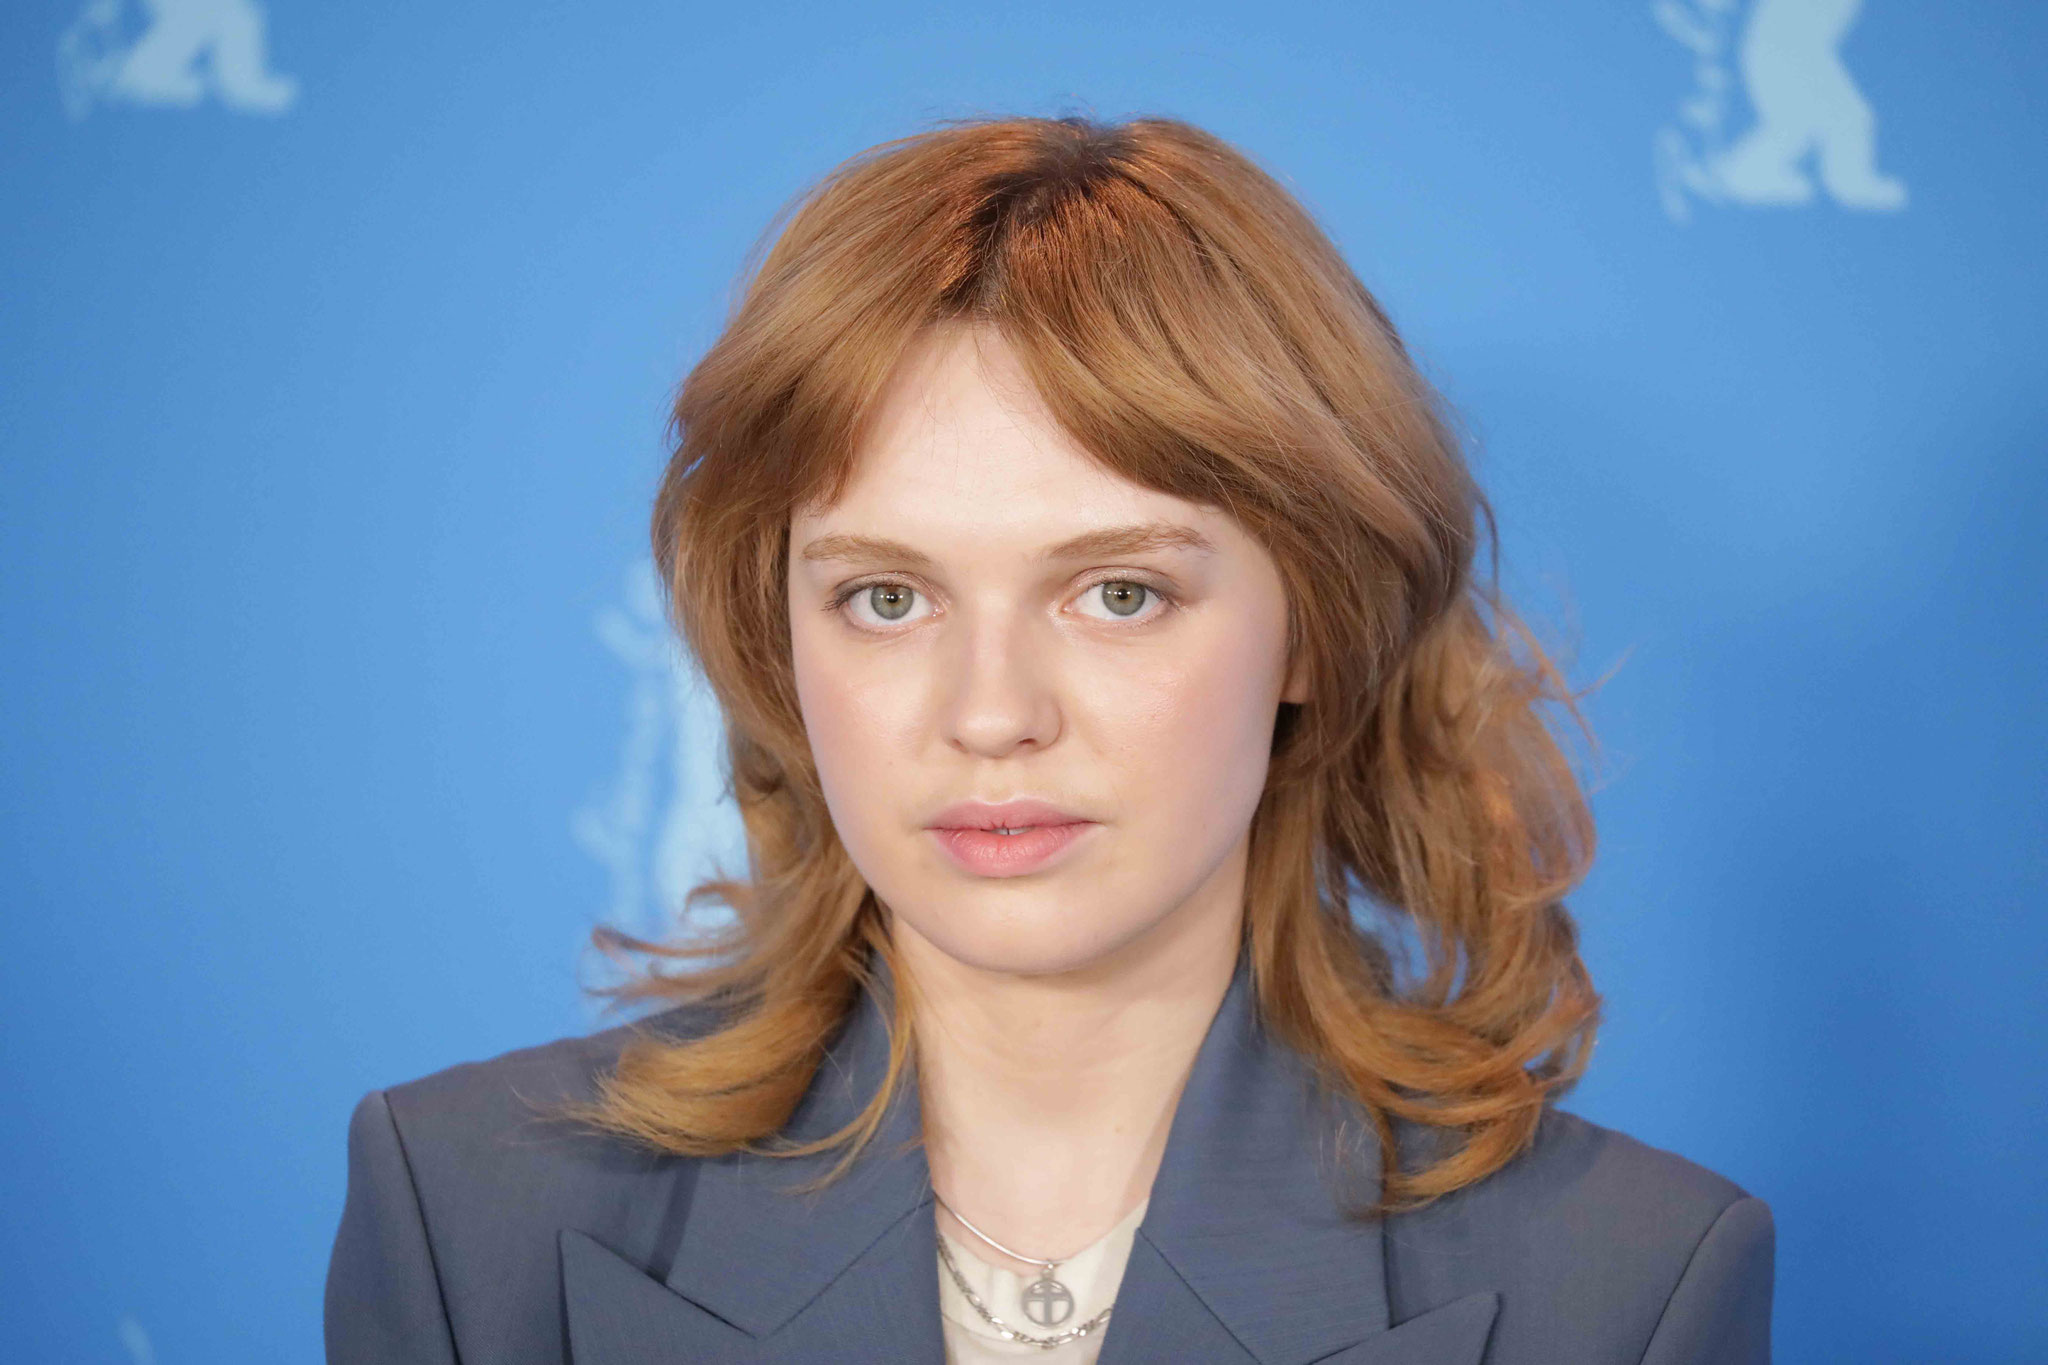 Odessa Young during the photo call for the film "Manodrome".